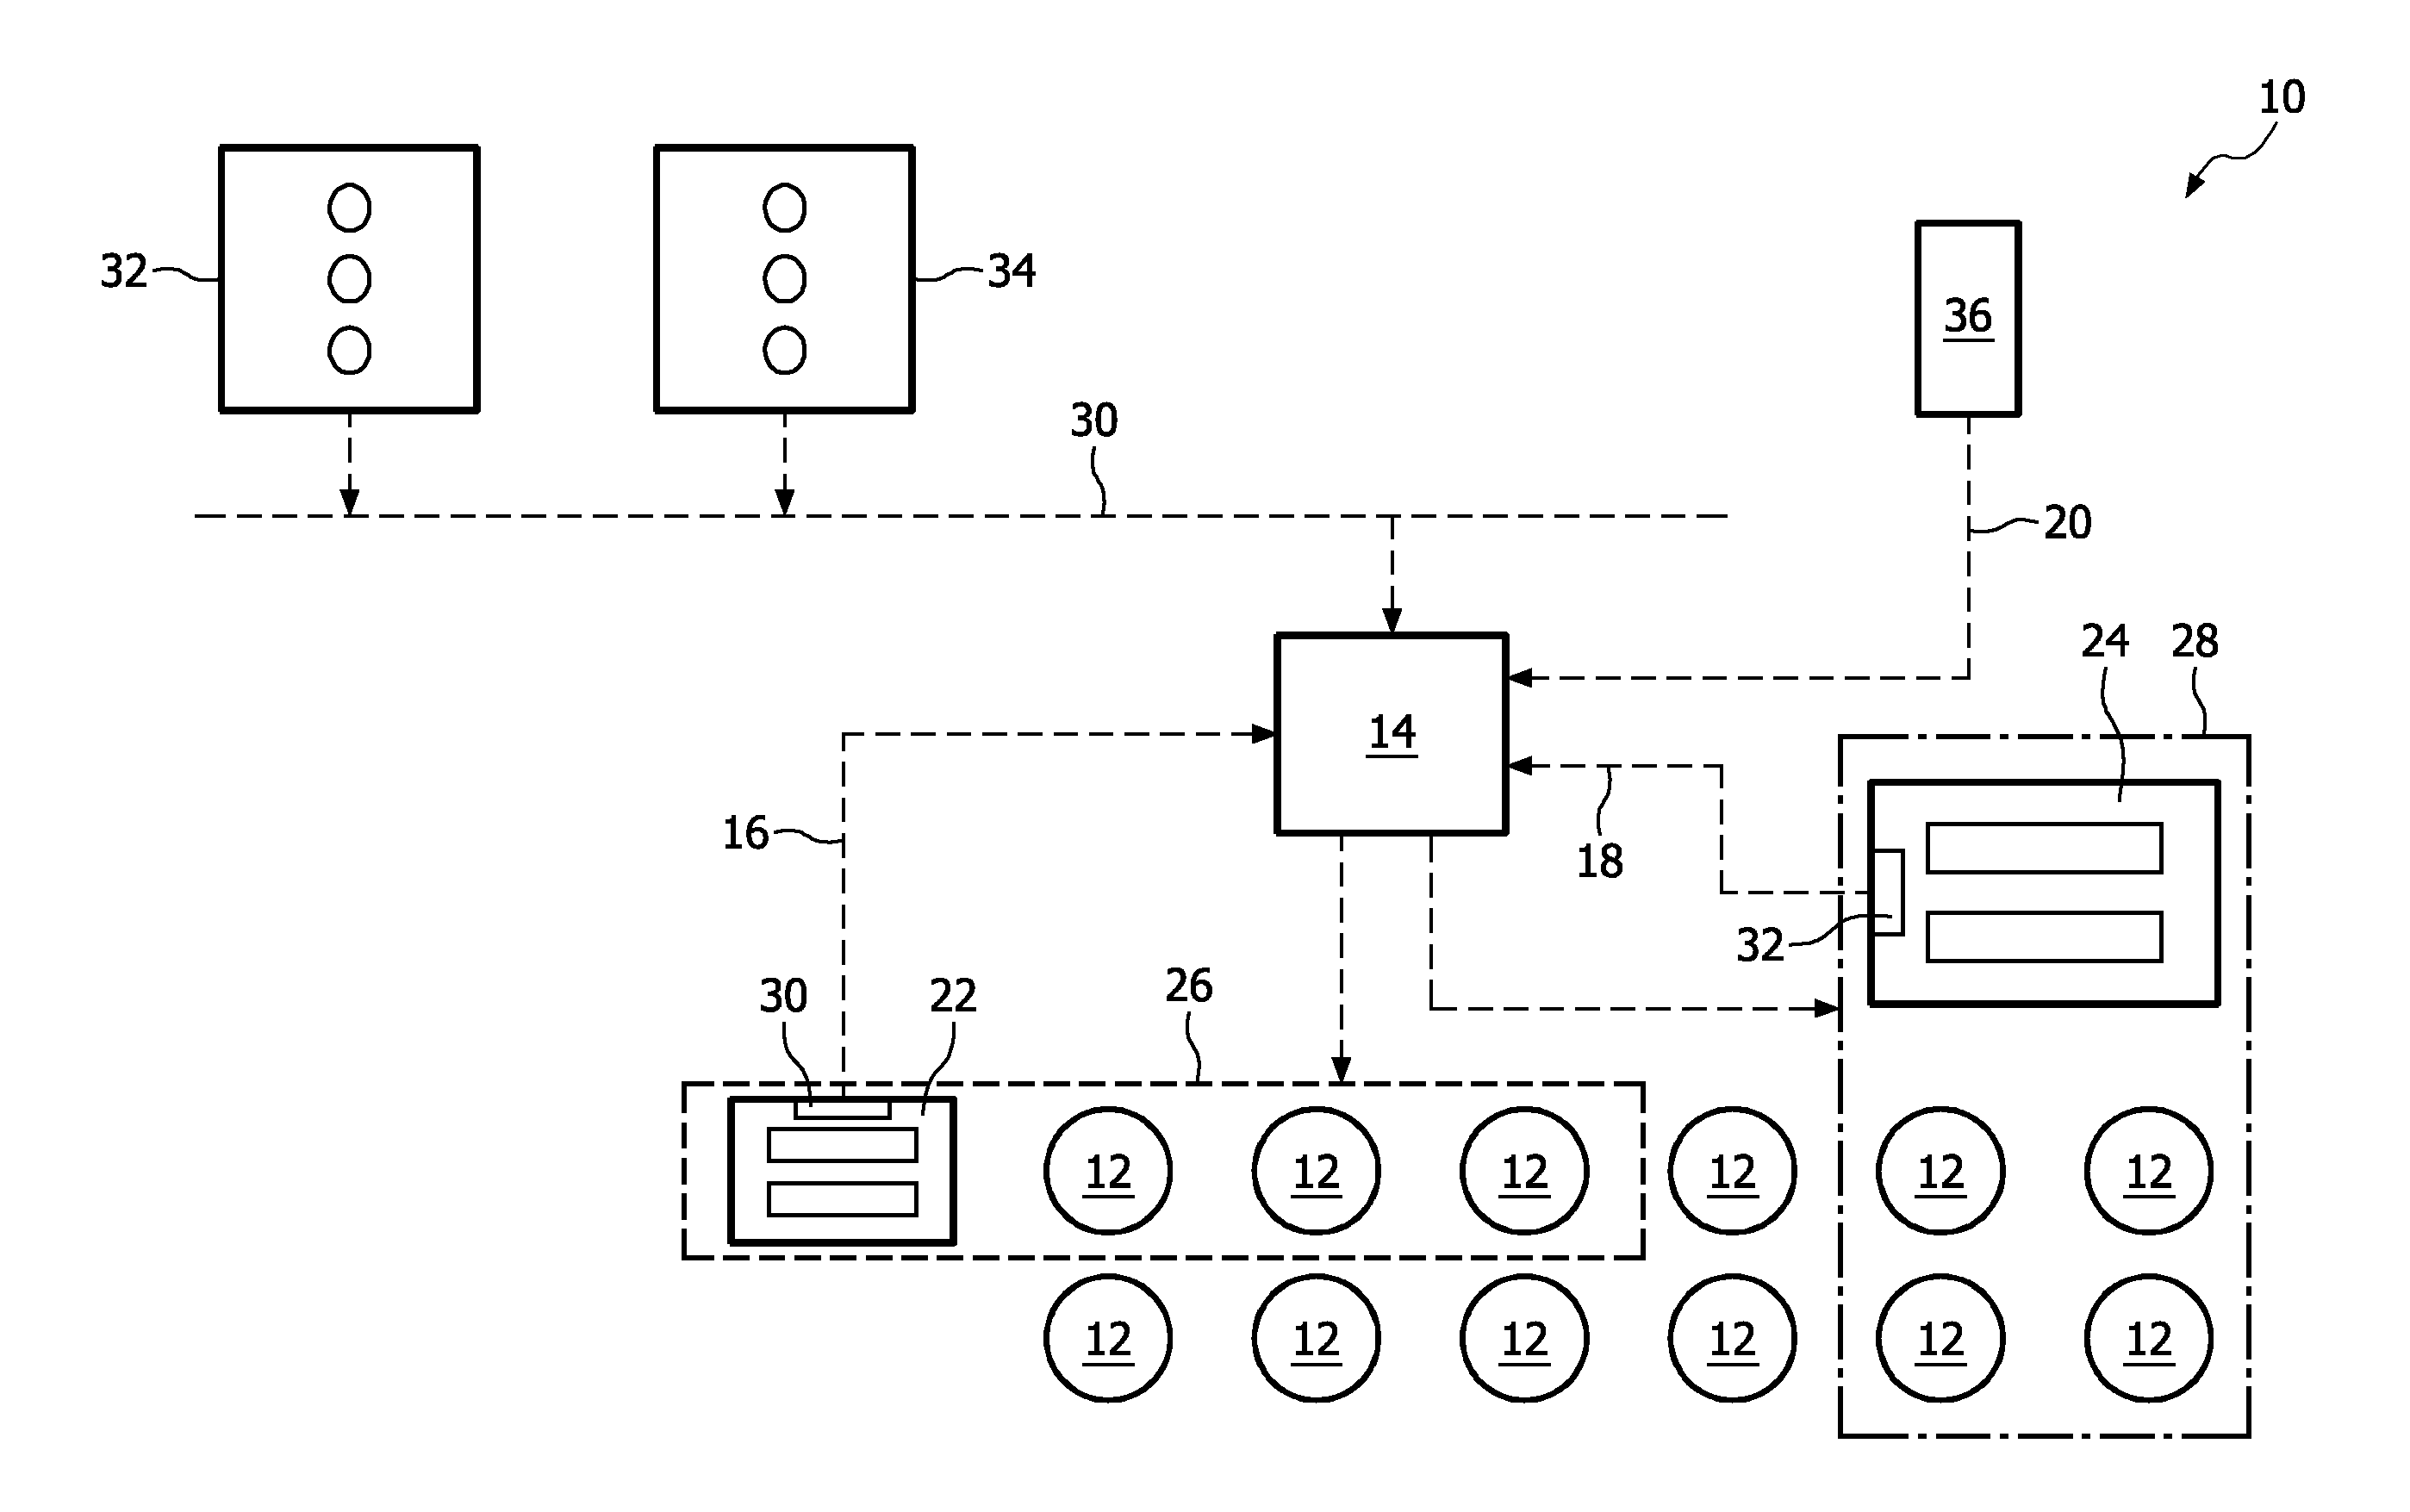 Area based lighting control system including local luminaire control